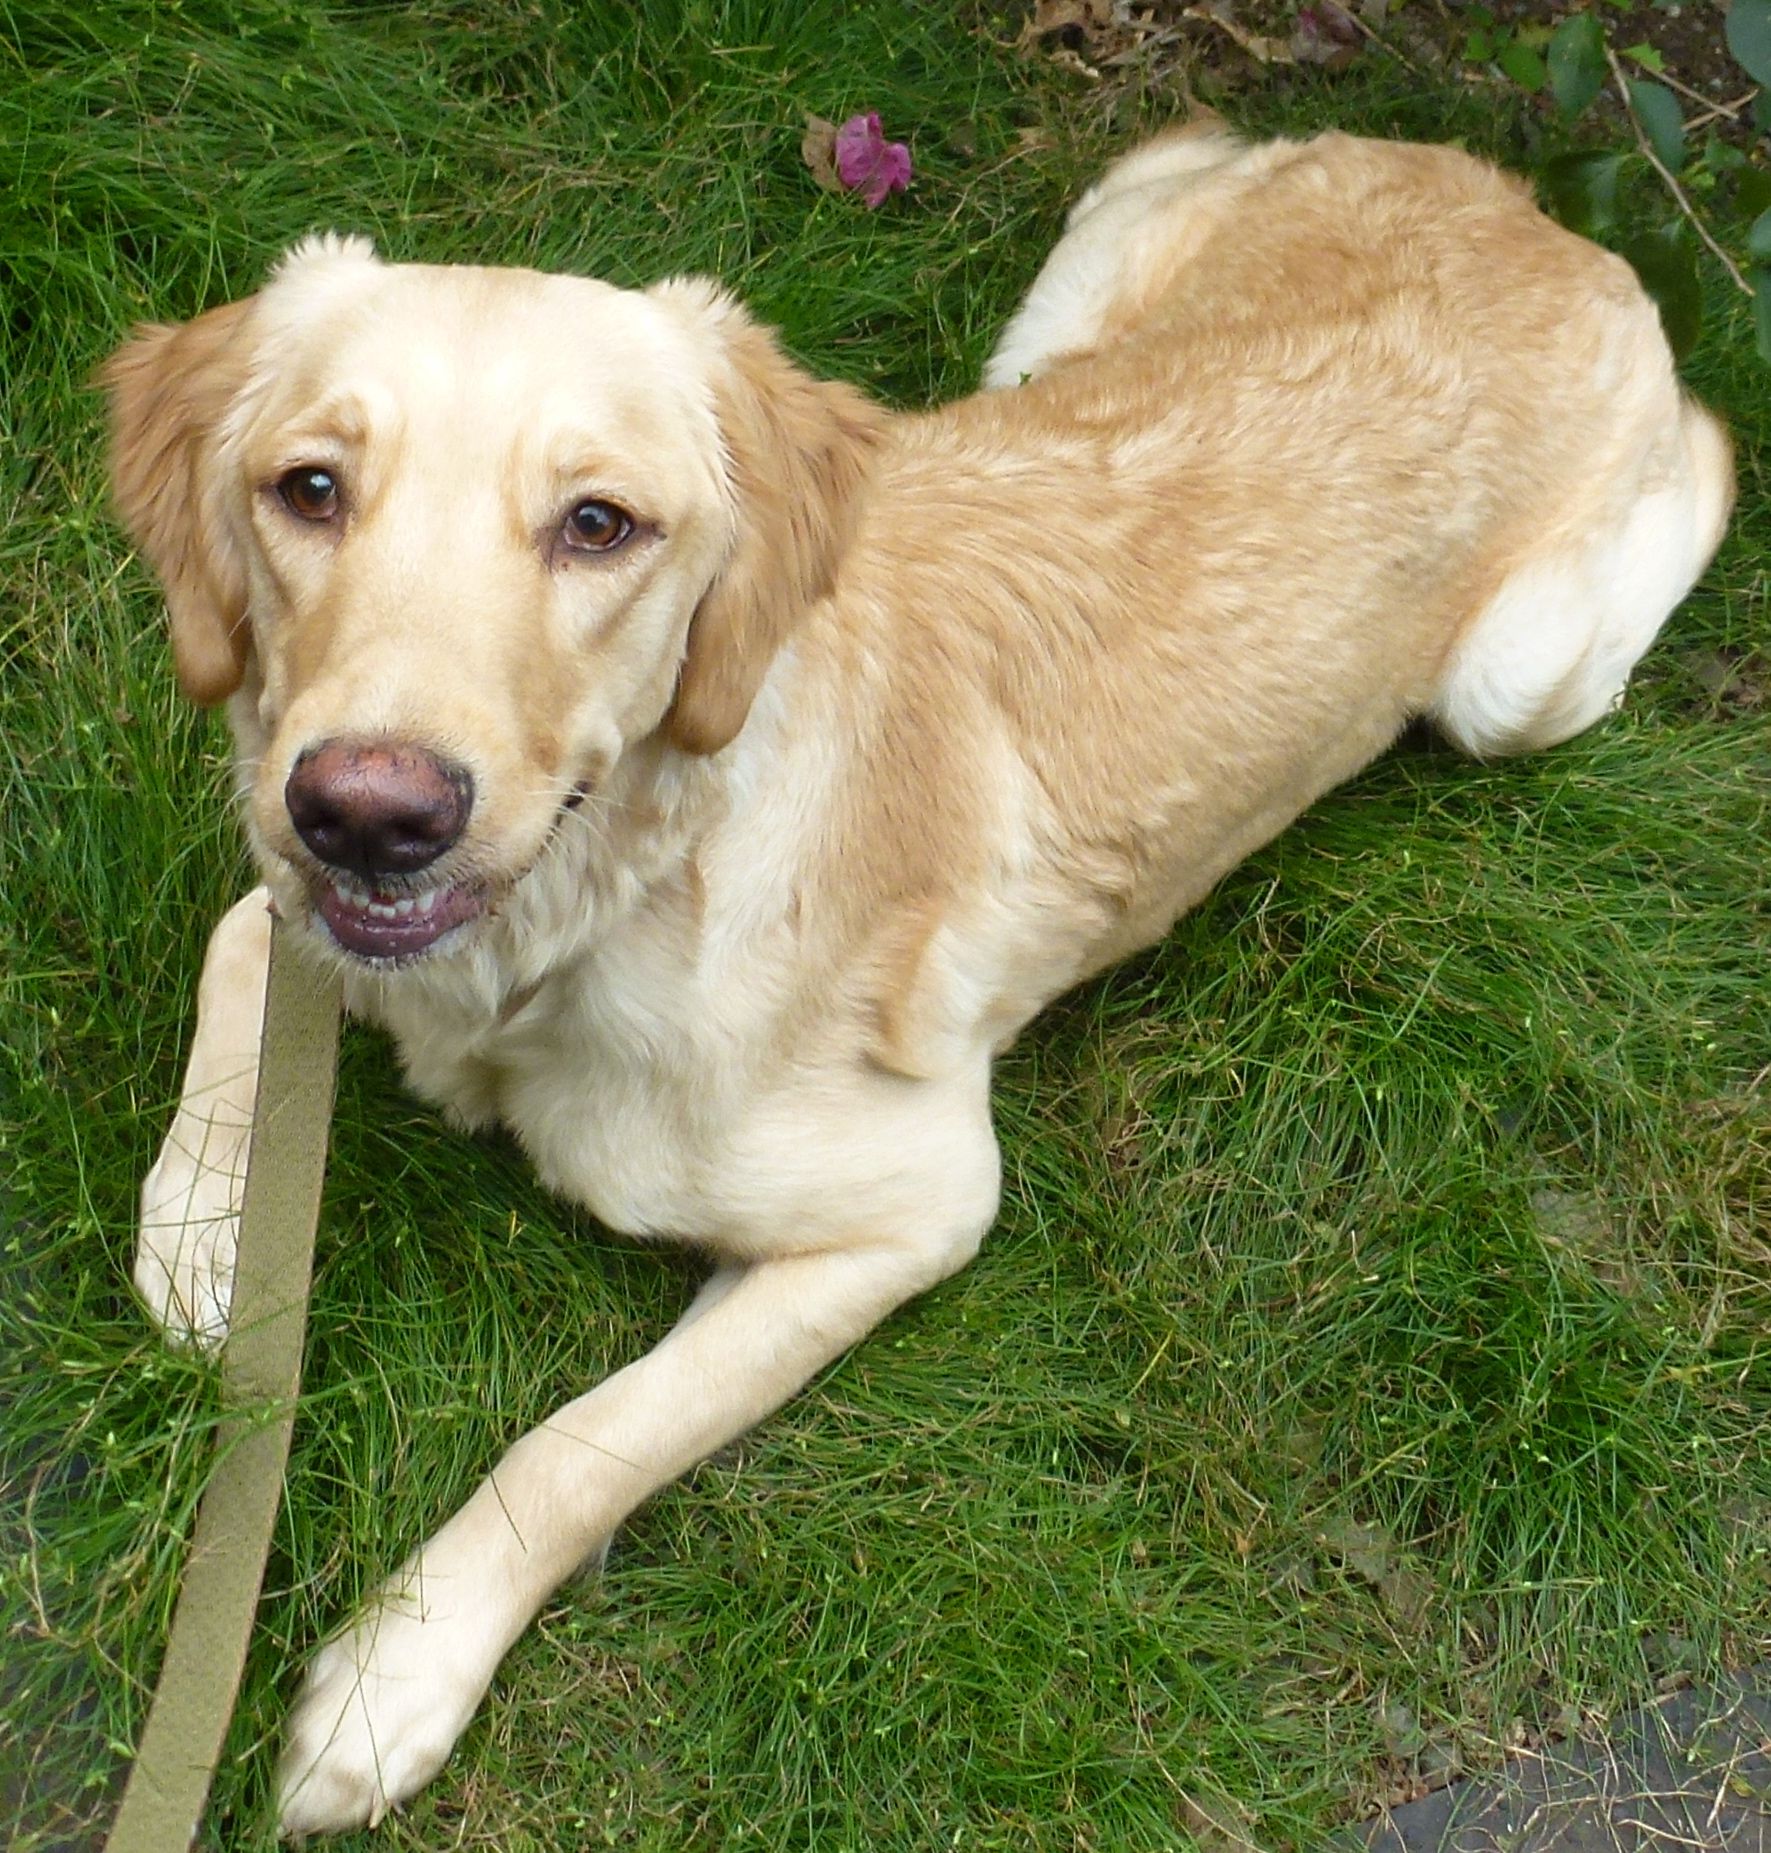 Bella the Golden Retriever with Balanced Obedience